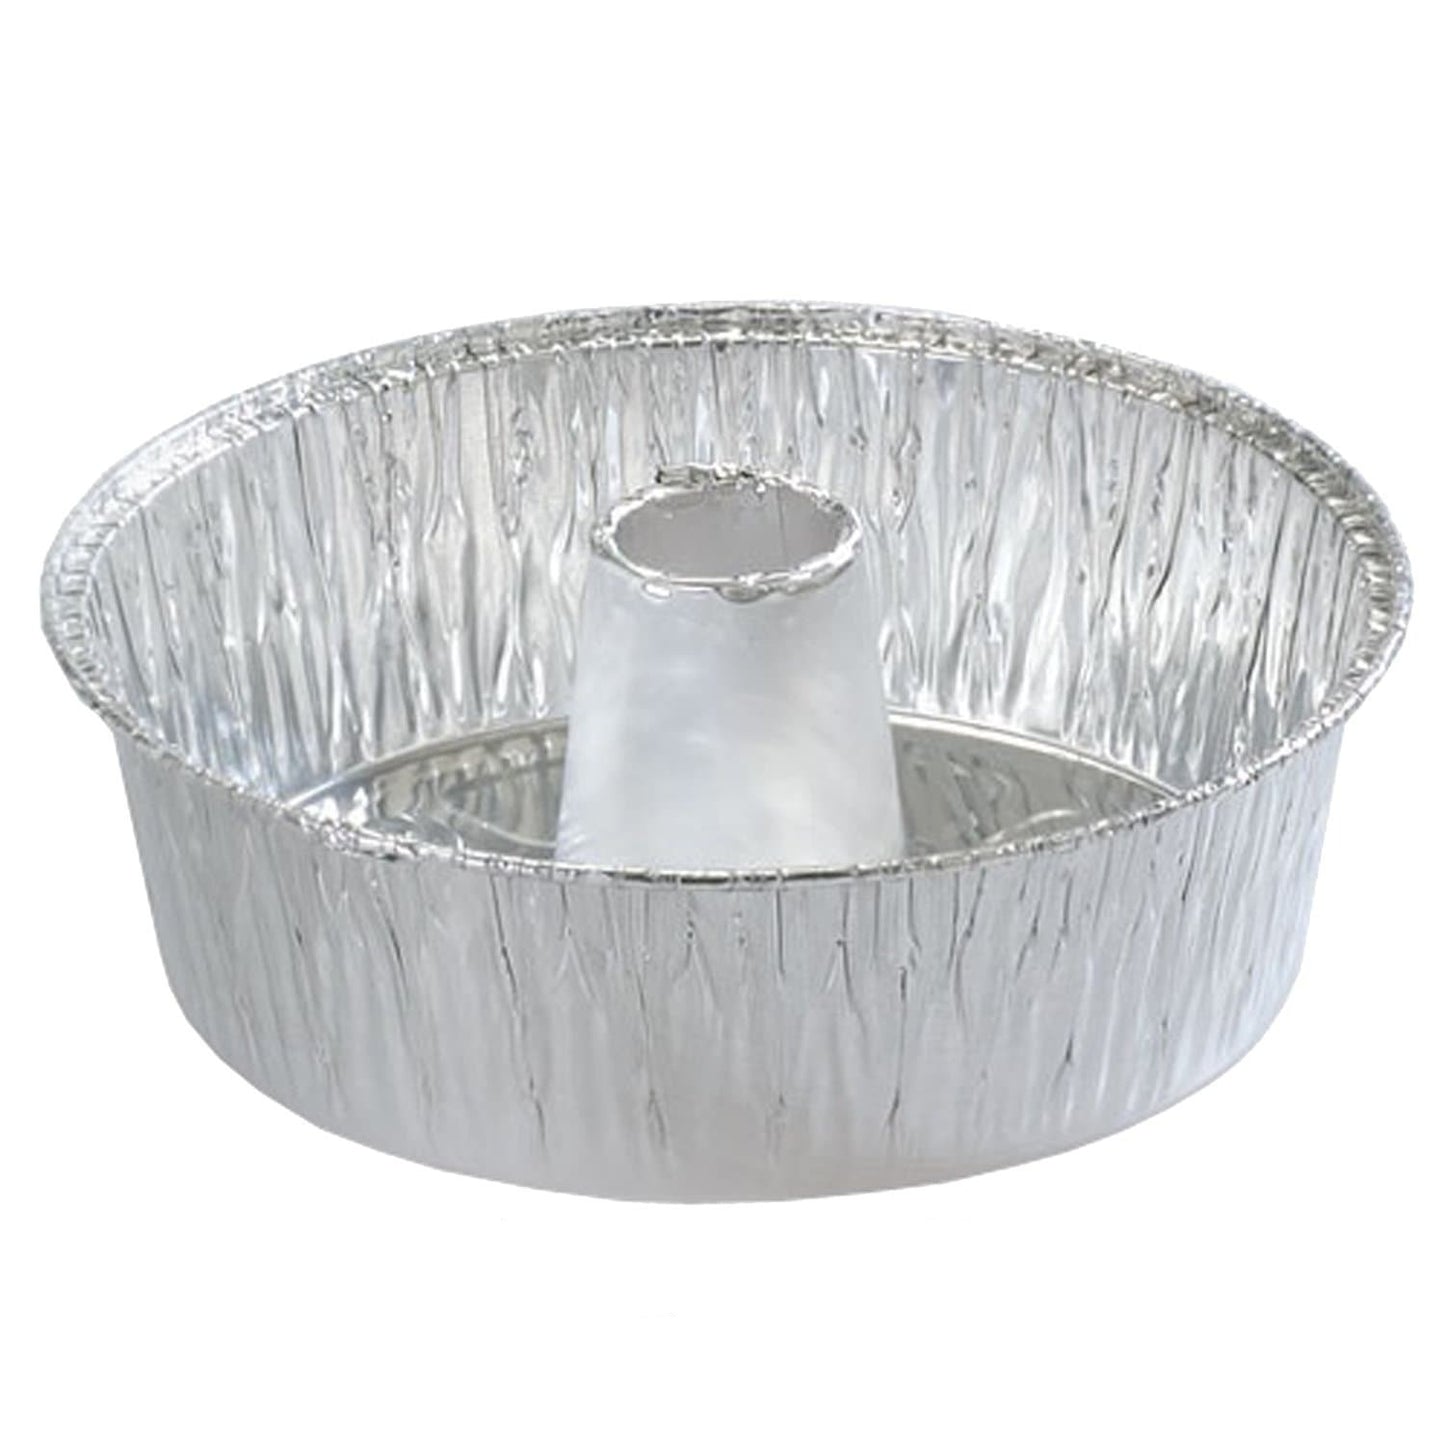 7 Inch Disposable Round Aluminum Foil Take-Out Pans - Disposable Tin  Containers, Perfect for Baking, Cooking, Catering, Parties, Cake Pans